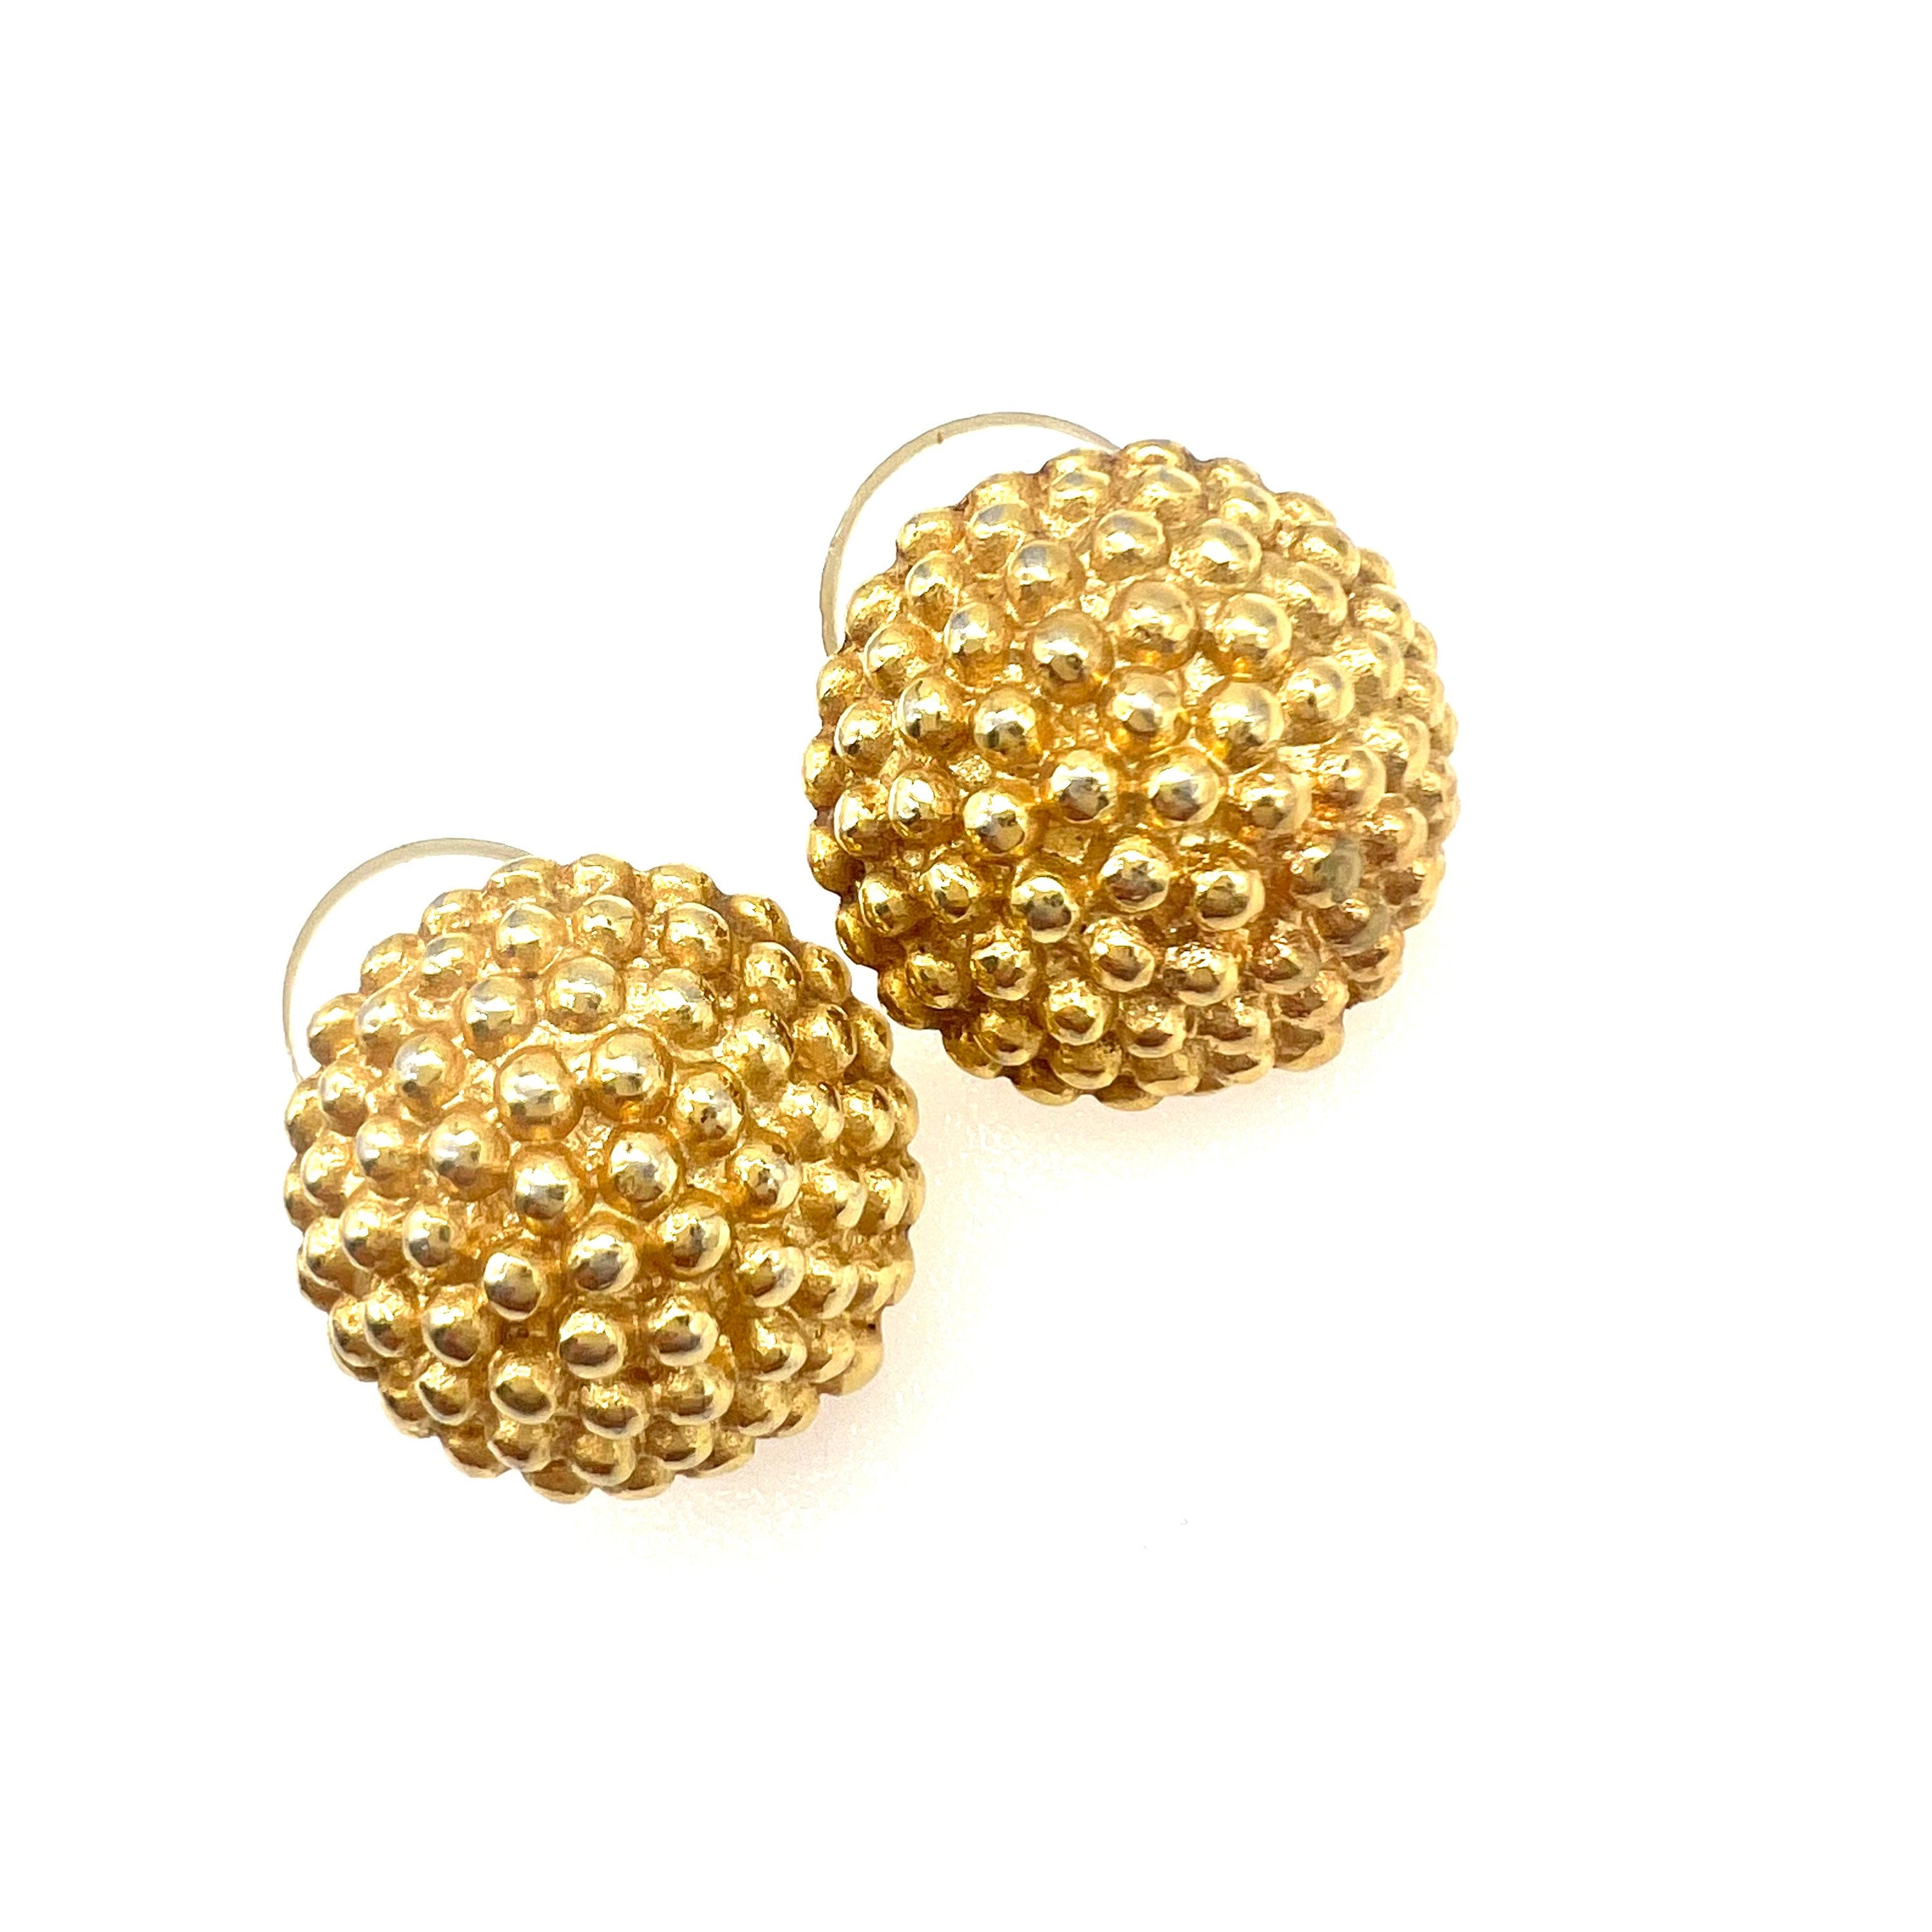 1gm gold - Trendy Thushi tops at Rs 350.00 | Gold Earrings | ID:  2853151018488